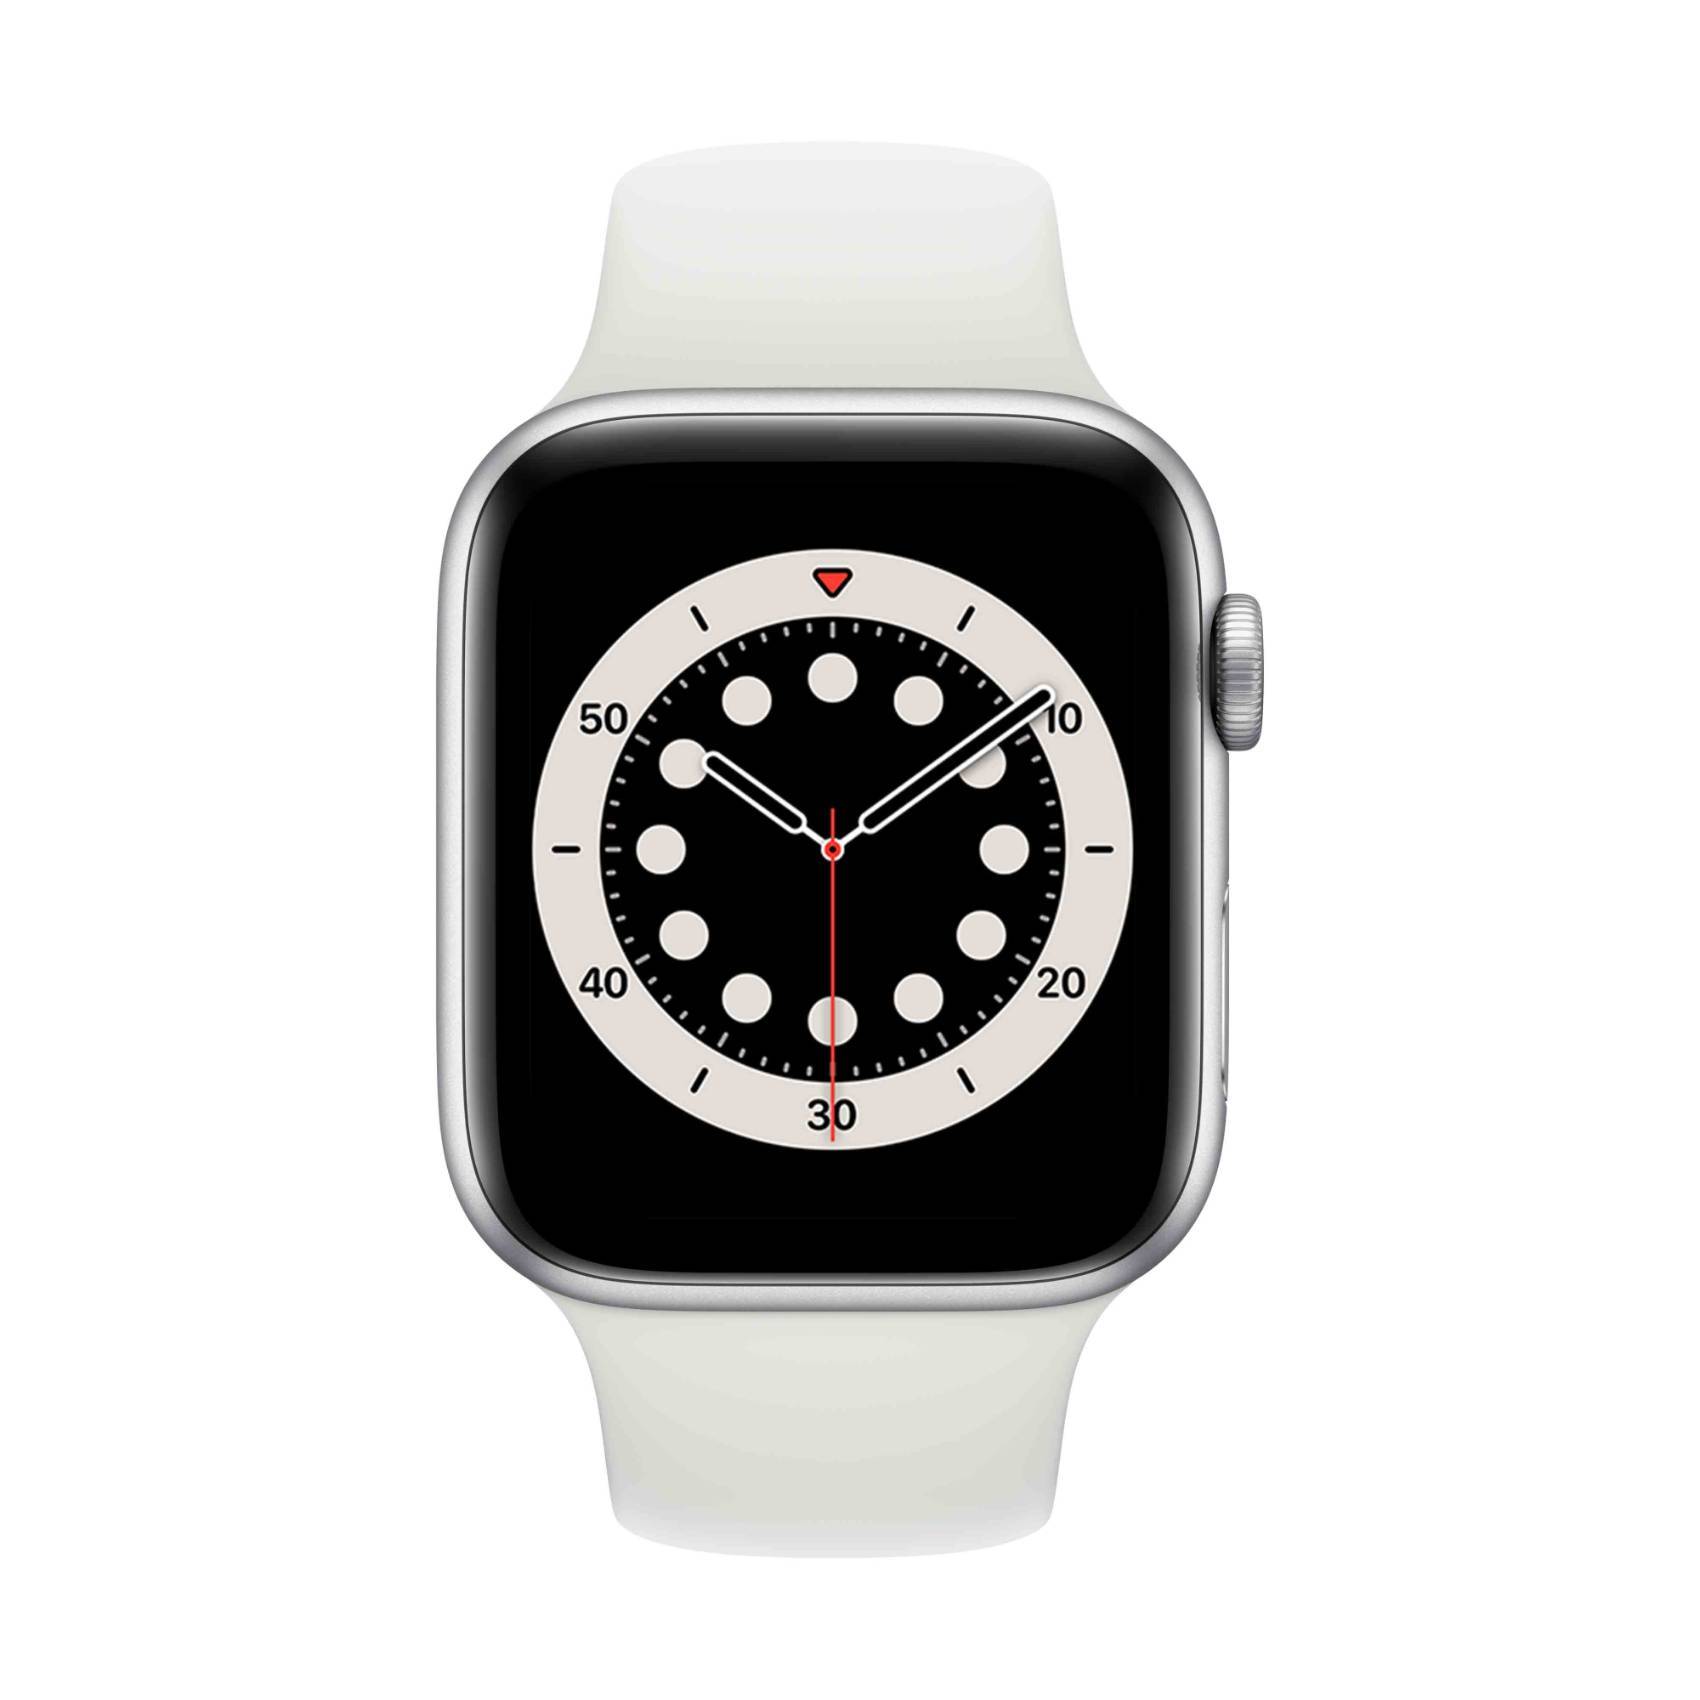 Buy Apple Watch Series 6 Gps 44mm Silver Aluminium Case With White Sport Band Regular Online Shop Smartphones Tablets Wearables On Carrefour Uae